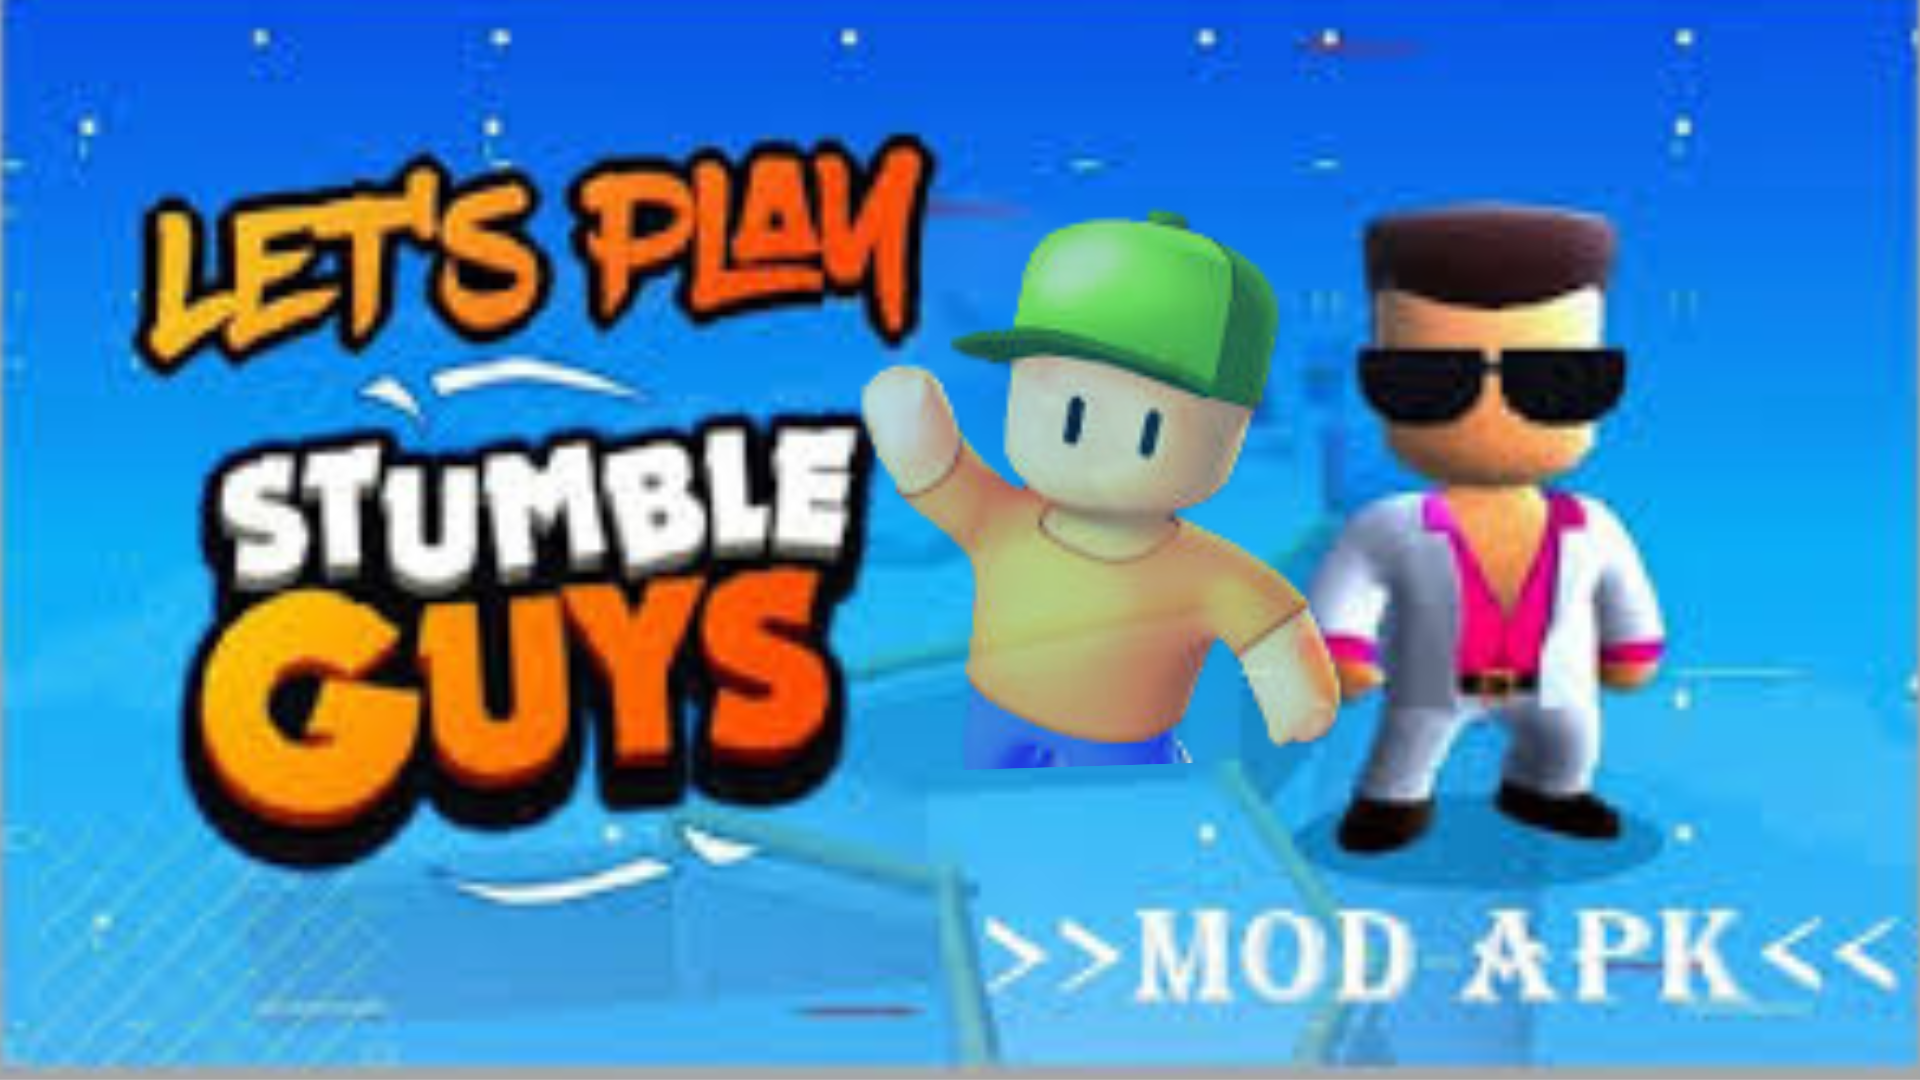 Download Stumble guys mod APK Unlimited money and gems